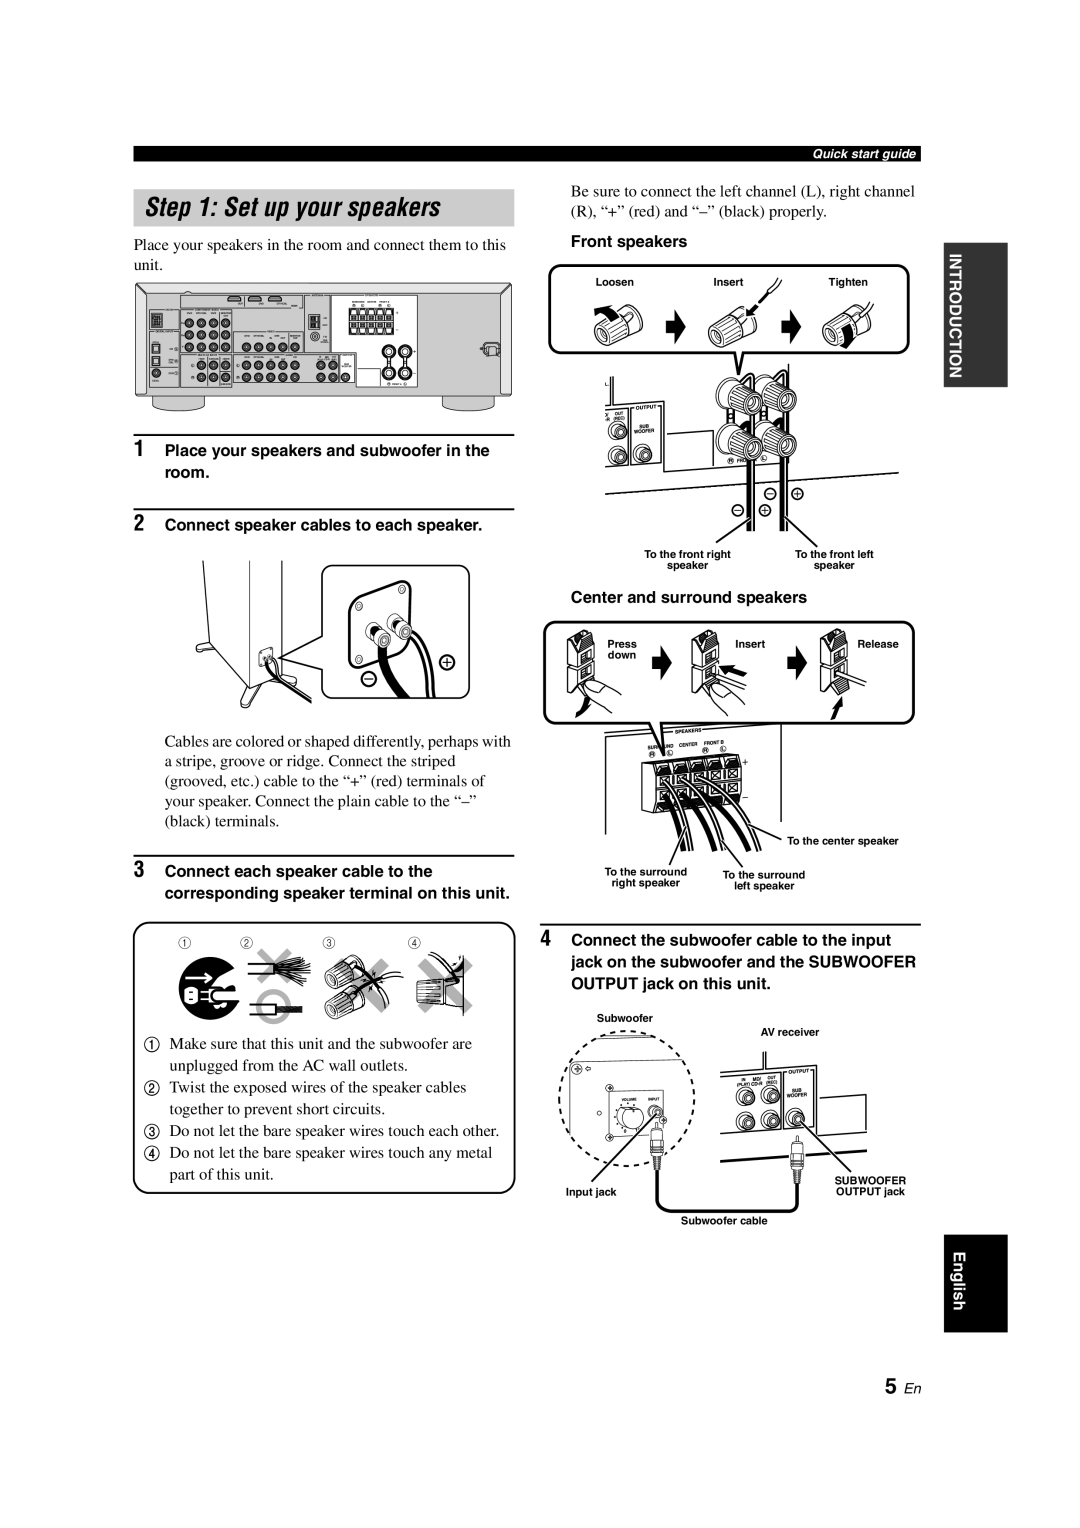 Yamaha HTR-6130 owner manual 5 En, 1Place your speakers and subwoofer in the room, 2Connect speaker cables to each speaker 